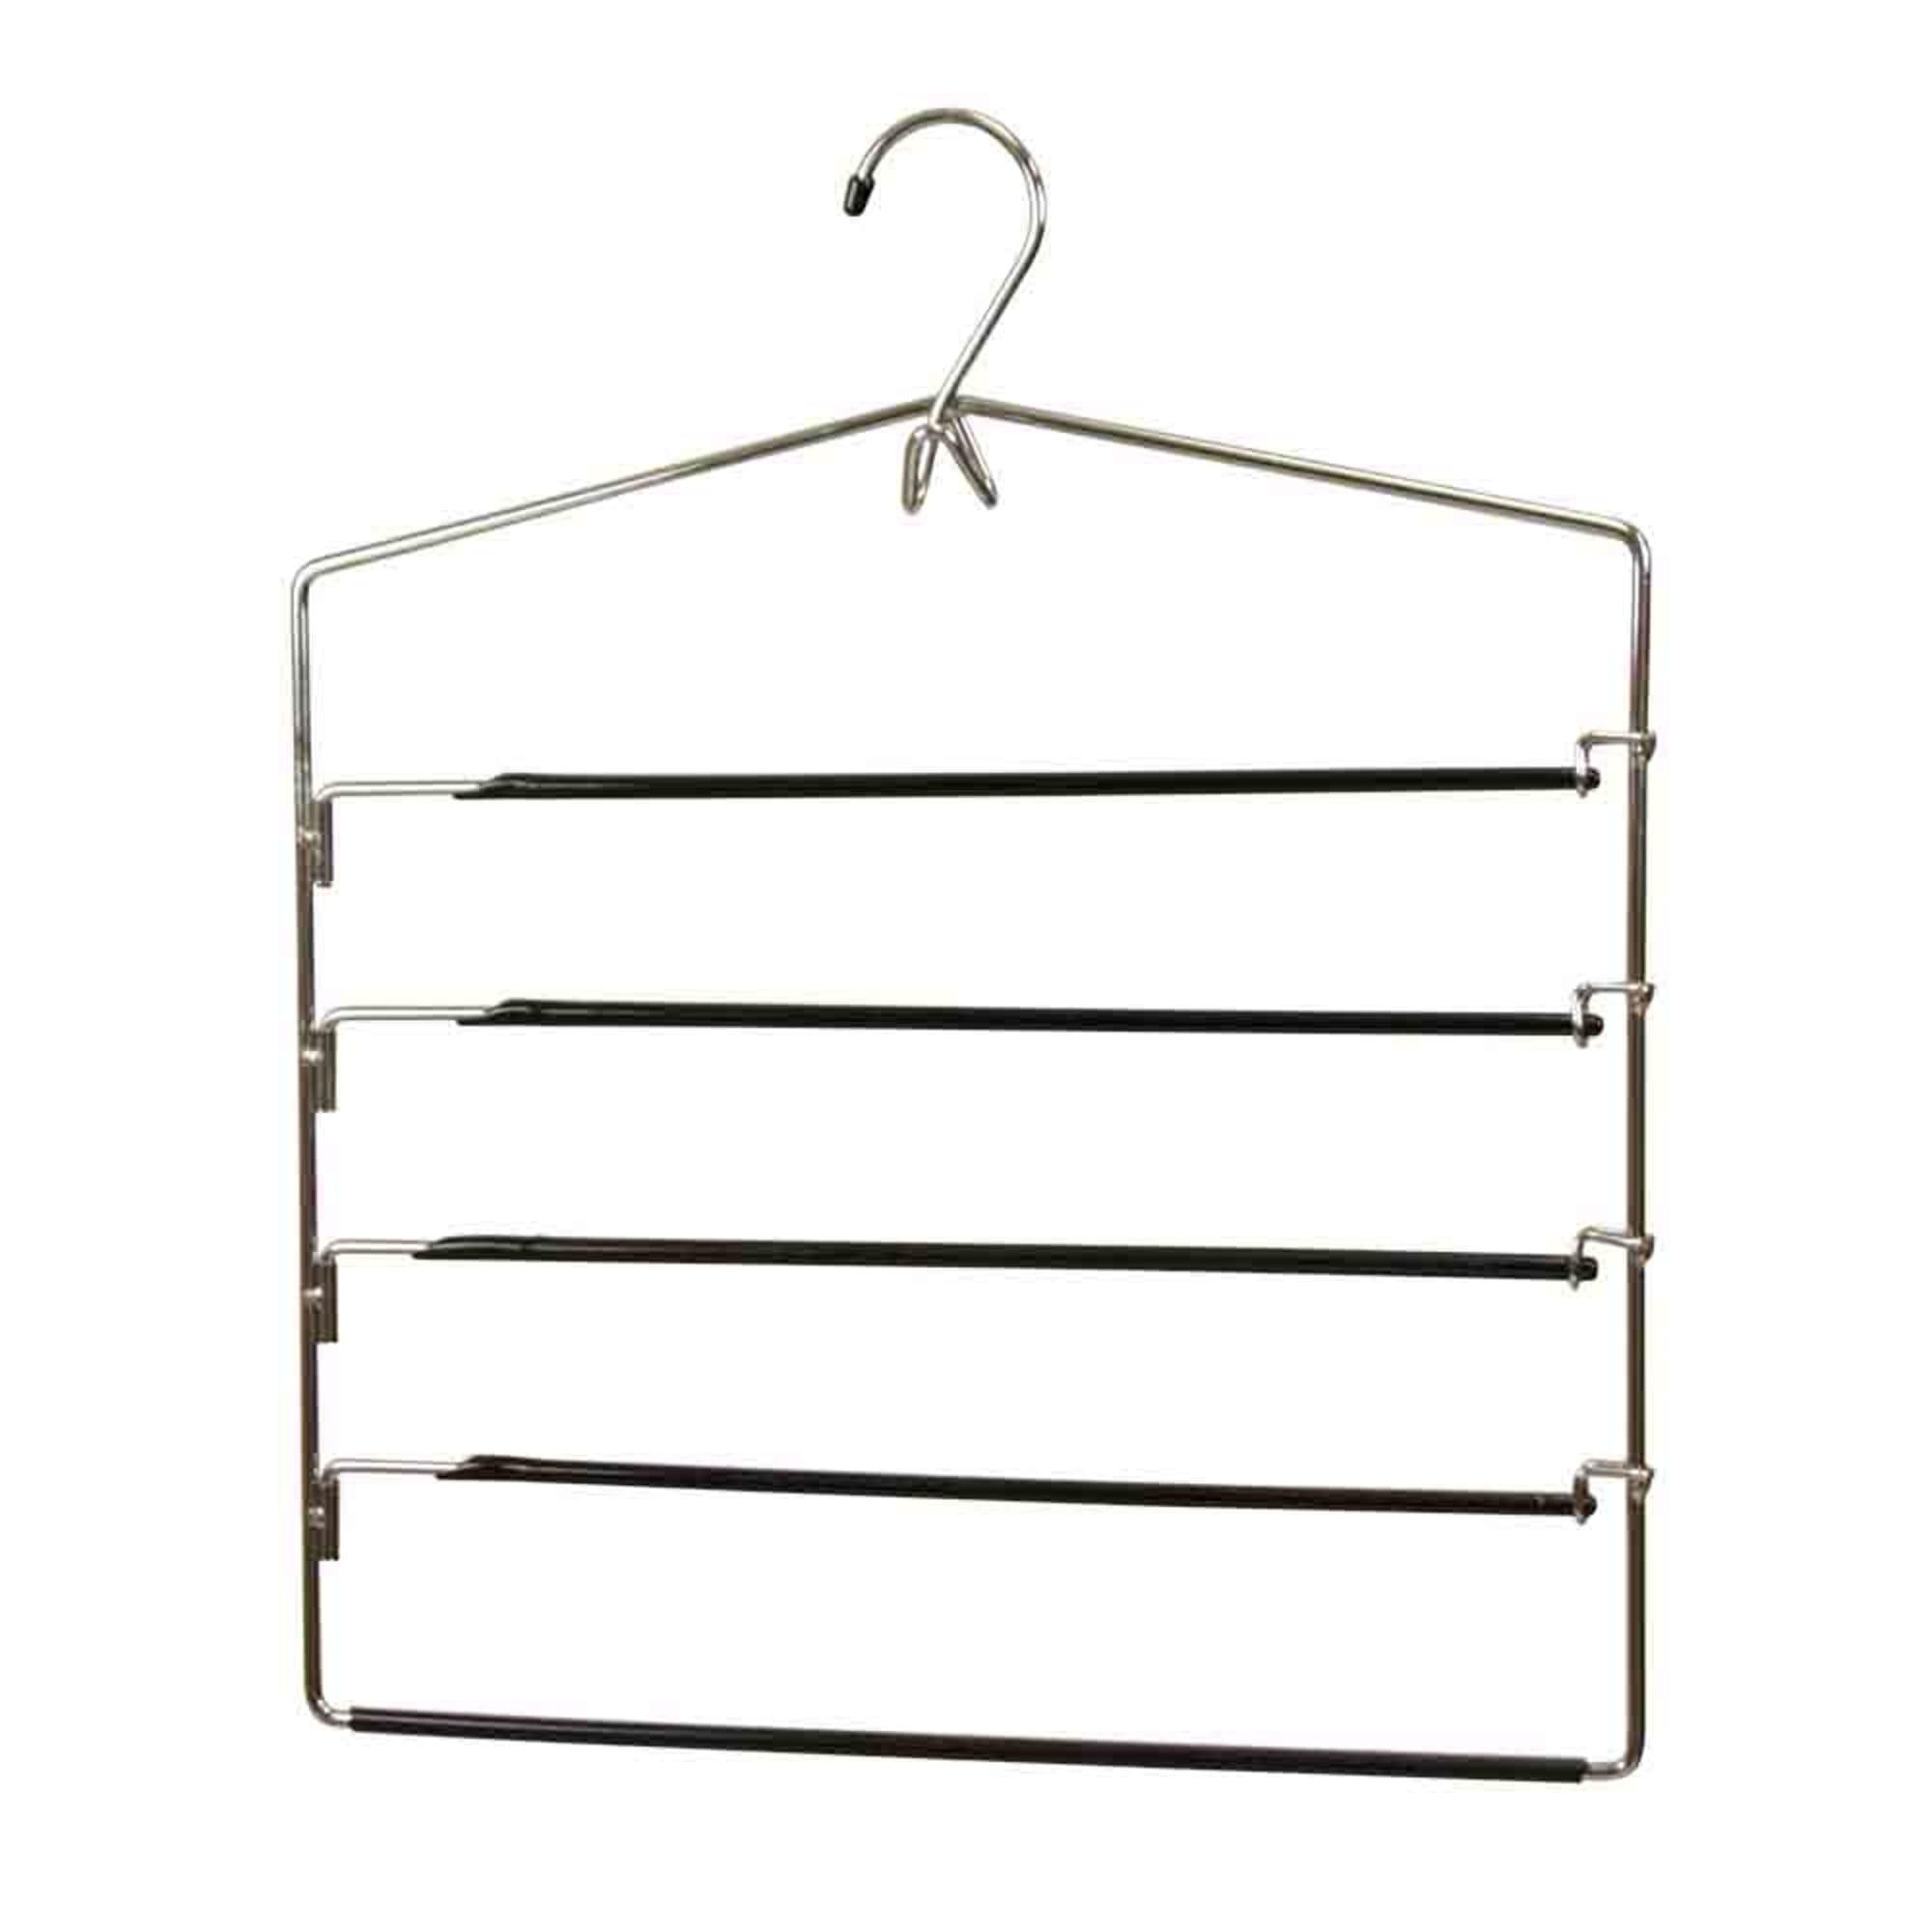 Home Basics 4 Tier Swinging Arm Trouser Hanger with Accessory Hook $5.00 EACH, CASE PACK OF 25